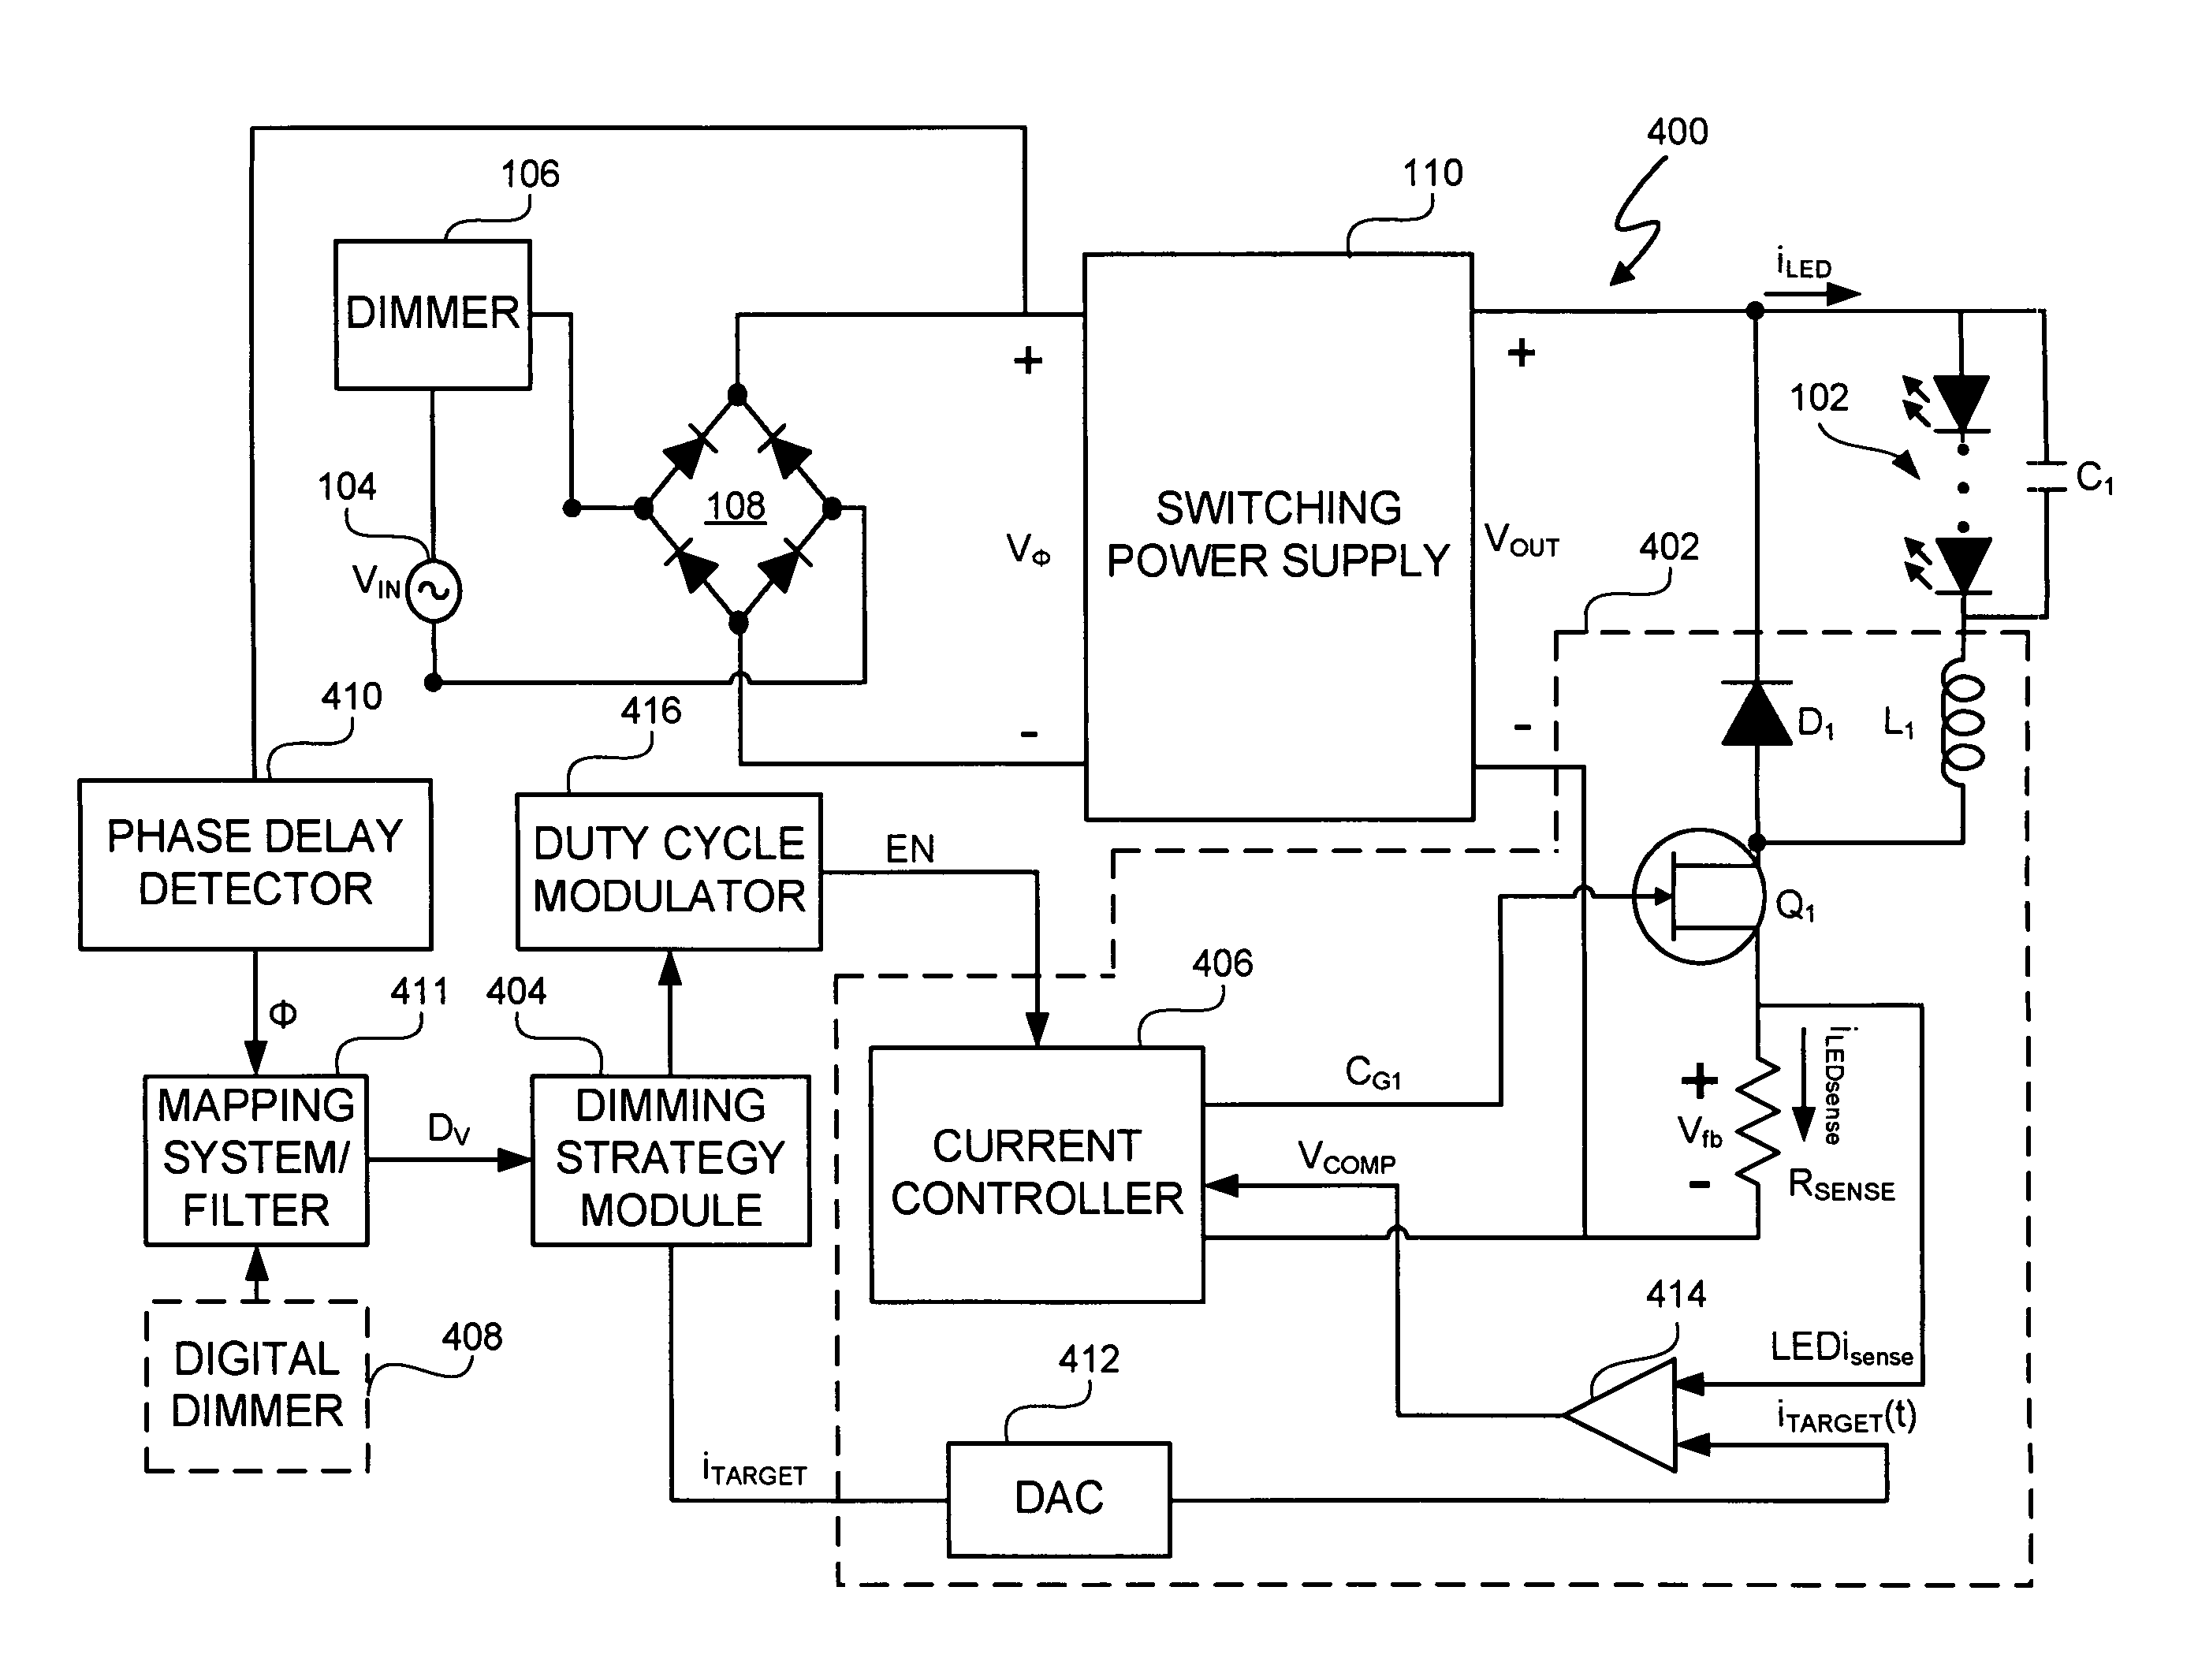 LED lighting system with a multiple mode current control dimming strategy